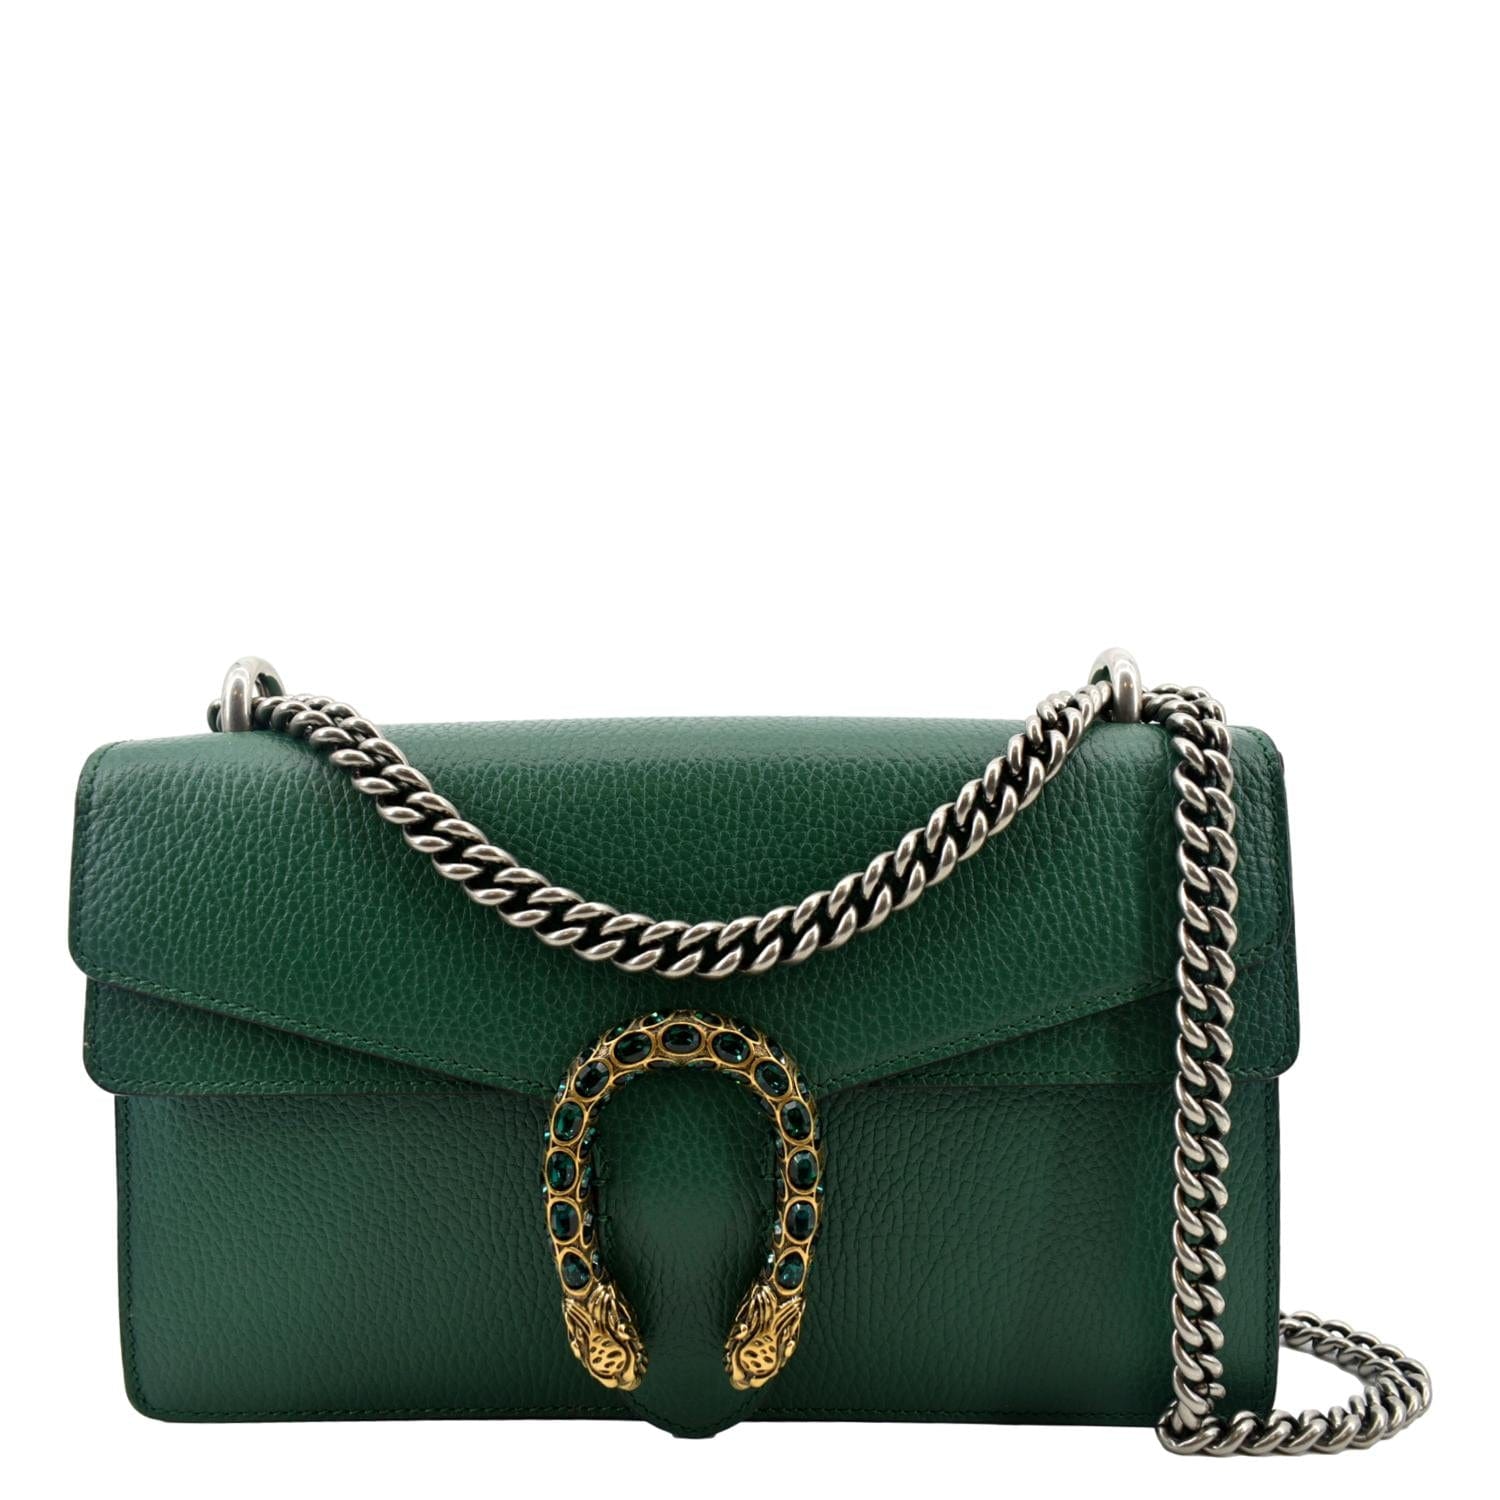 Gucci Green Small Dionysus Leather Shoulder Bag Pony-style